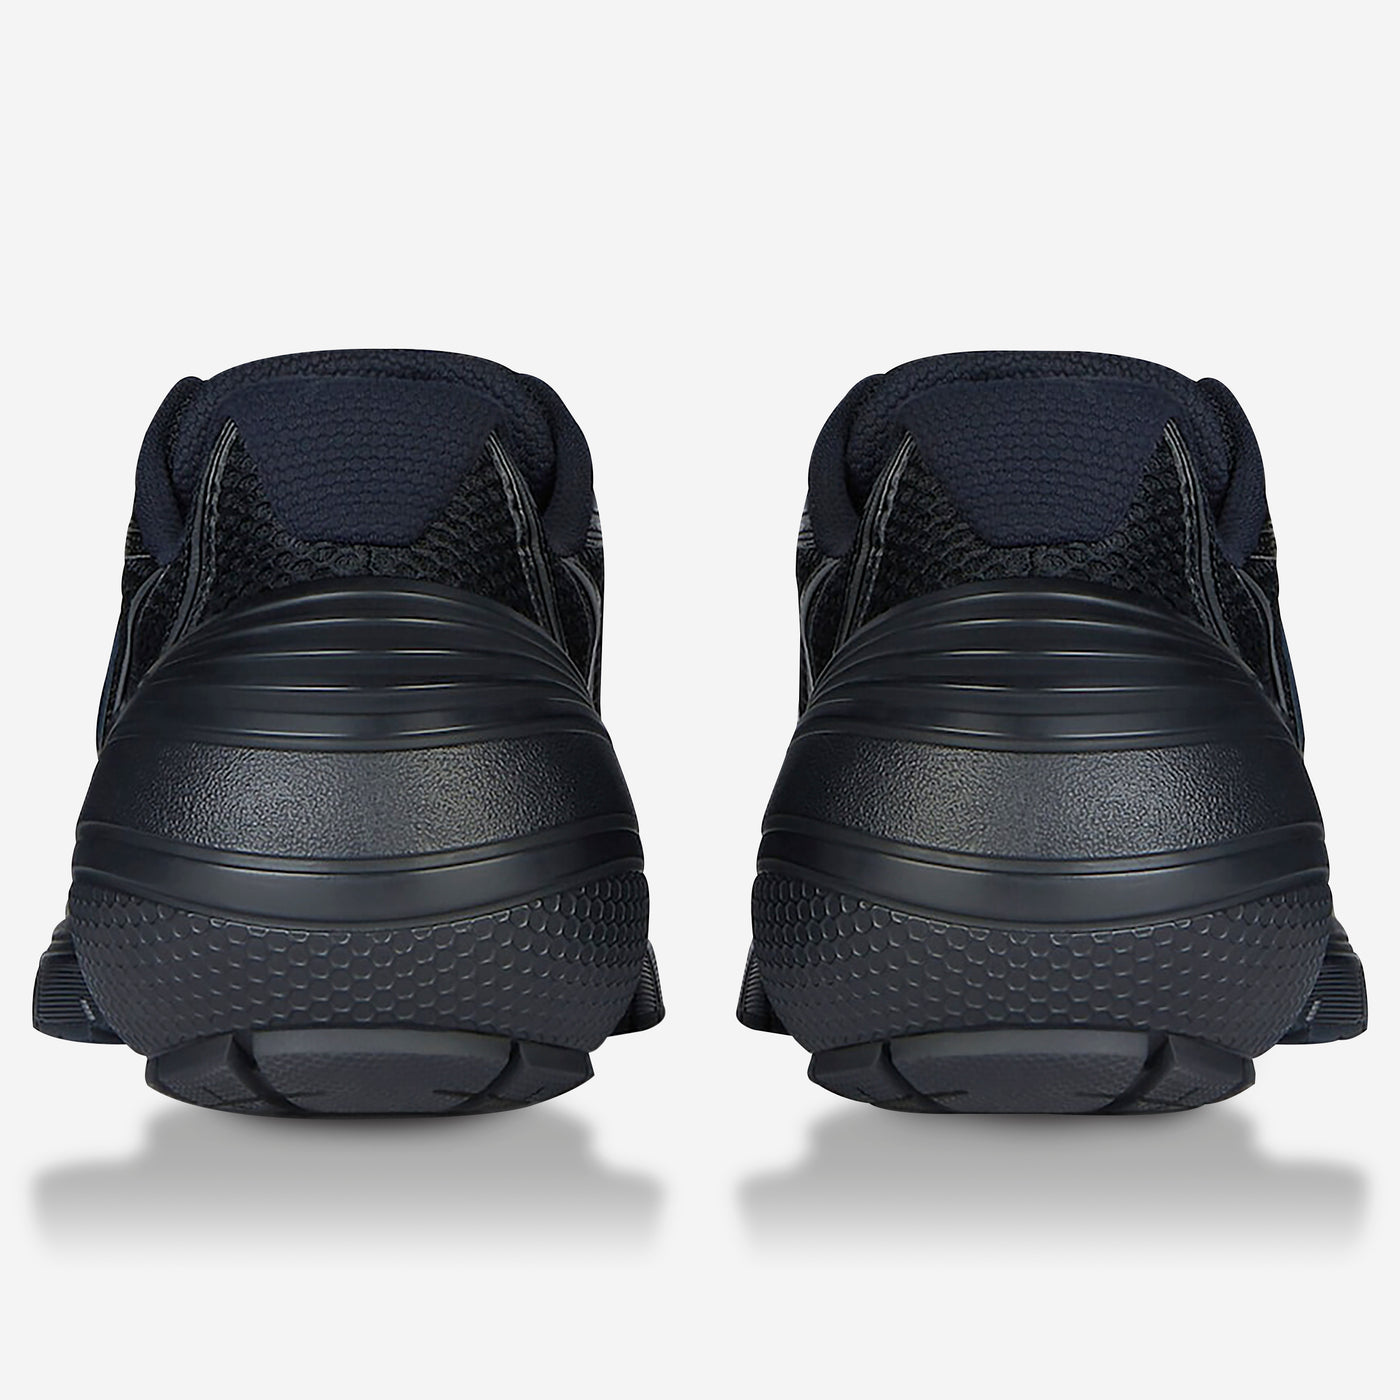 Givenchy TK-MX Runner Sneakers